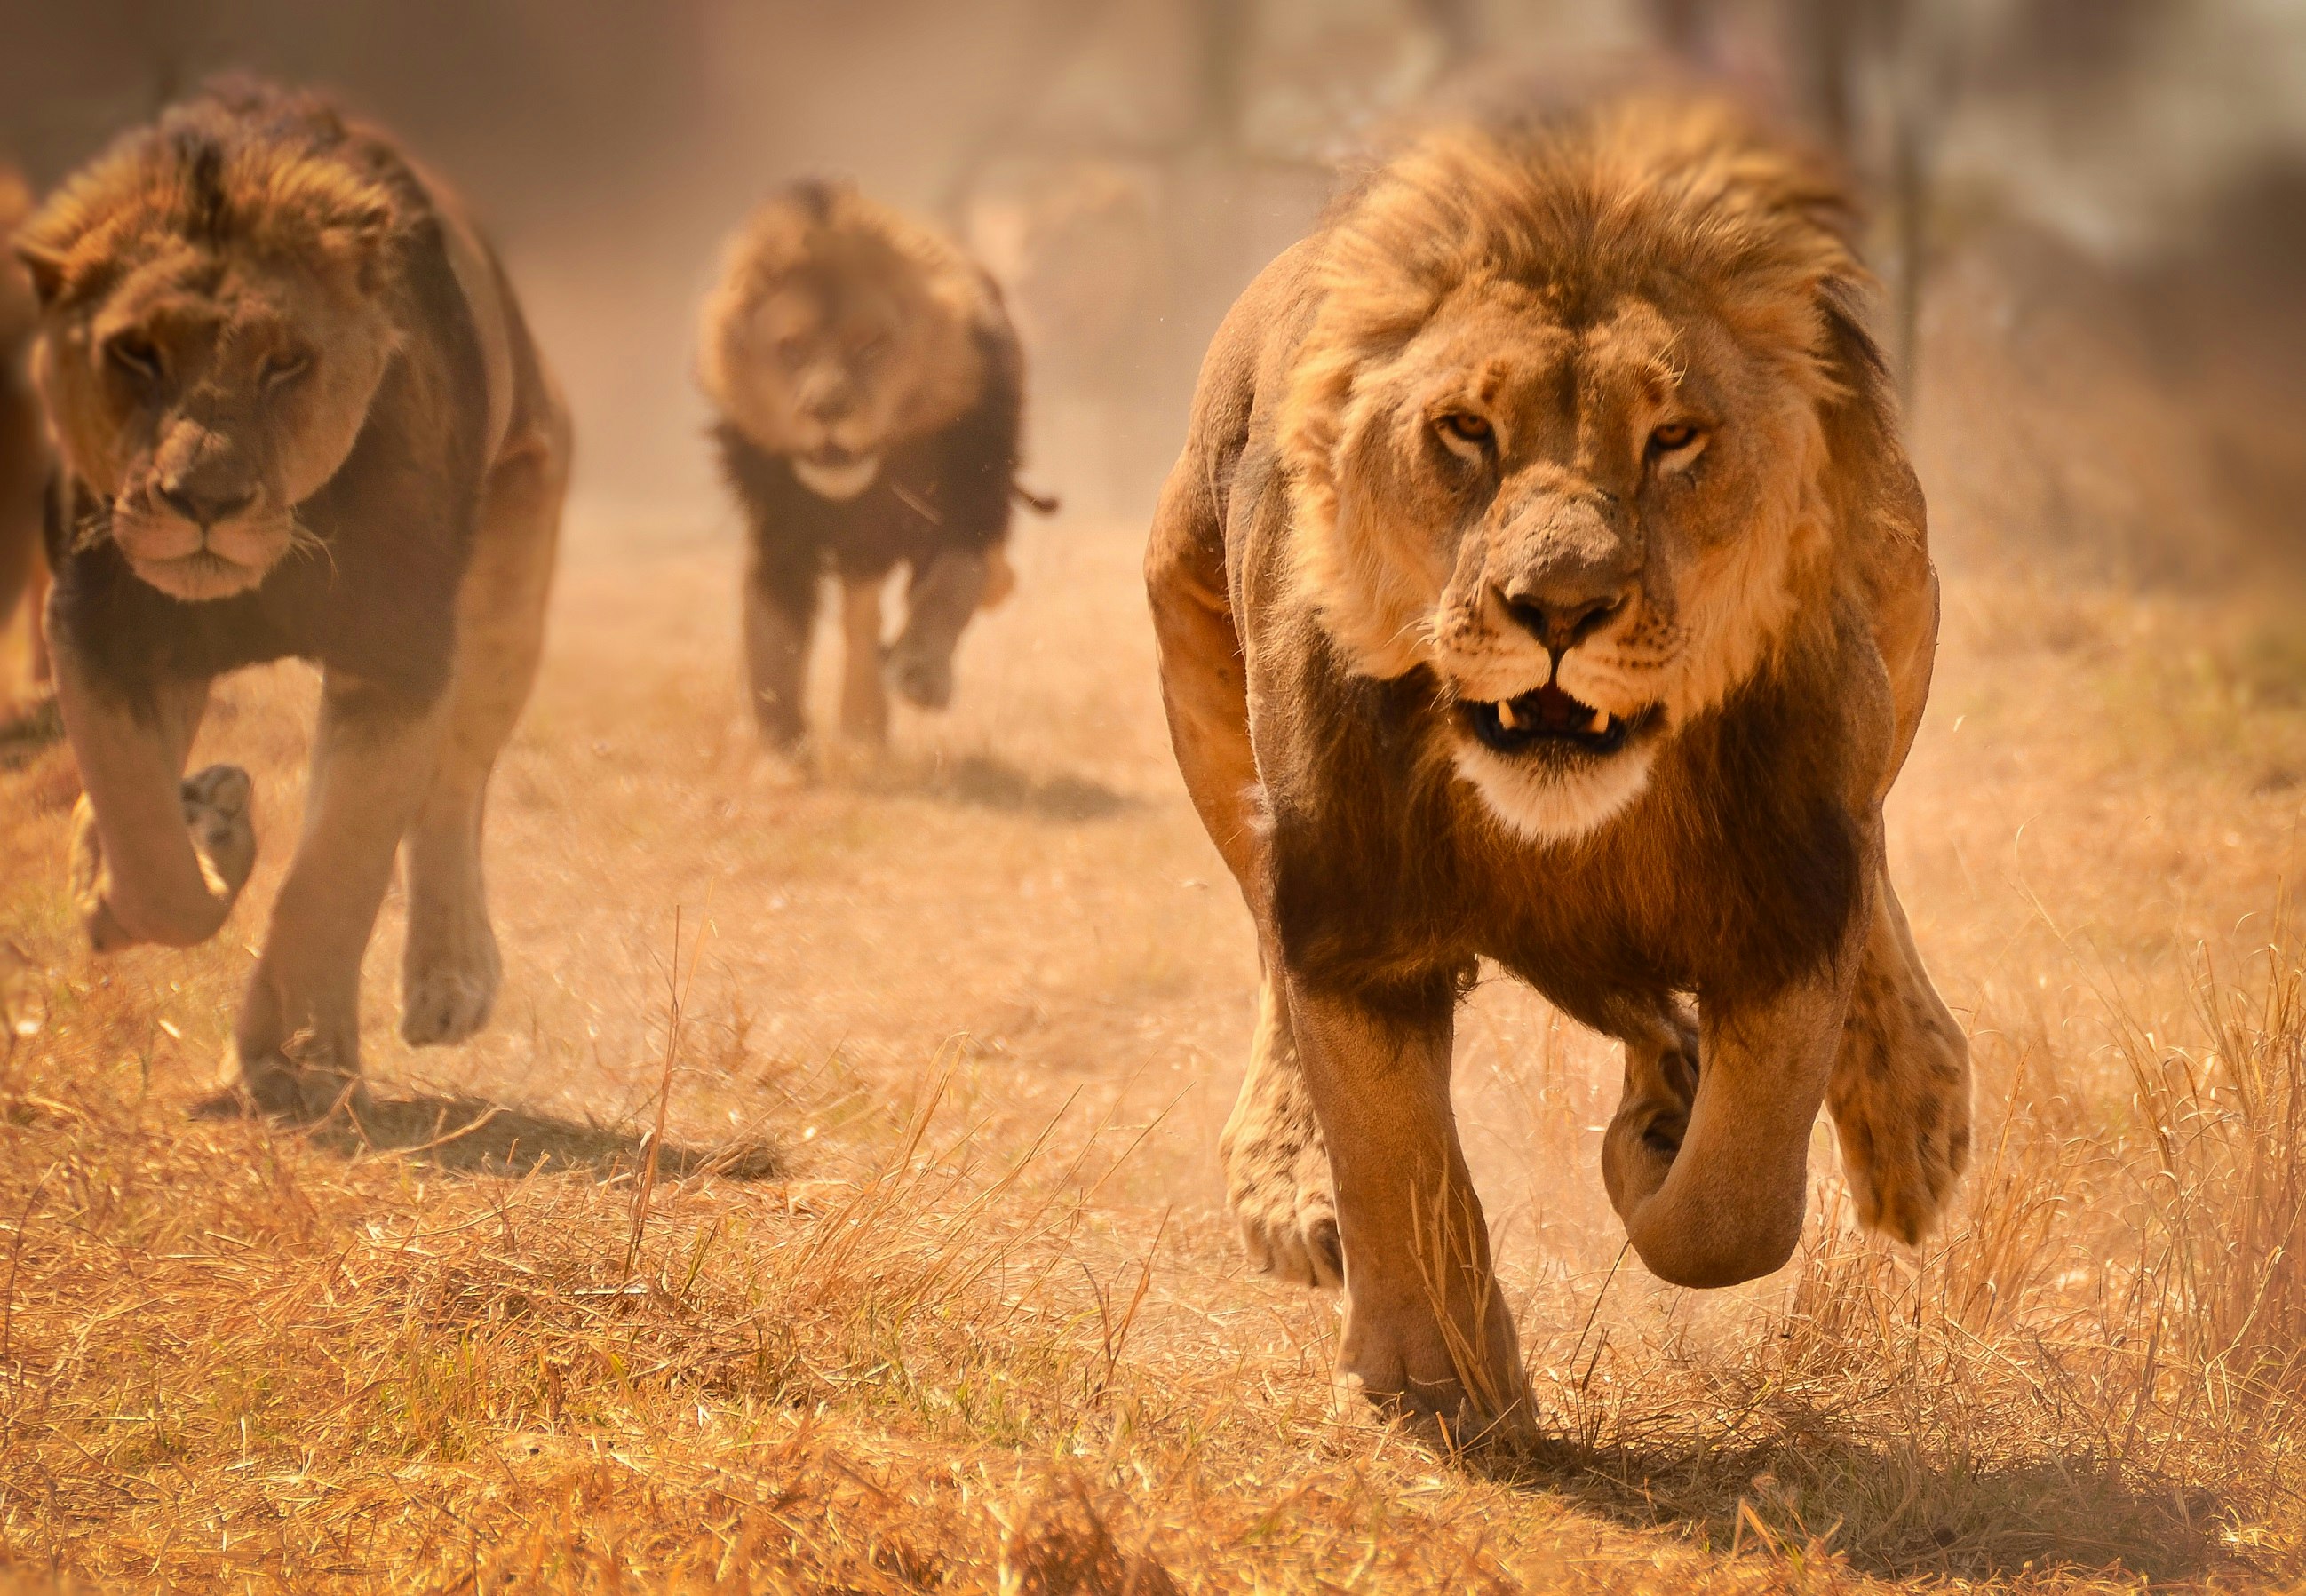 Three male lions running ferociously towards the camera, kicking up dust as they go; the entire scene is a scorched savannah.